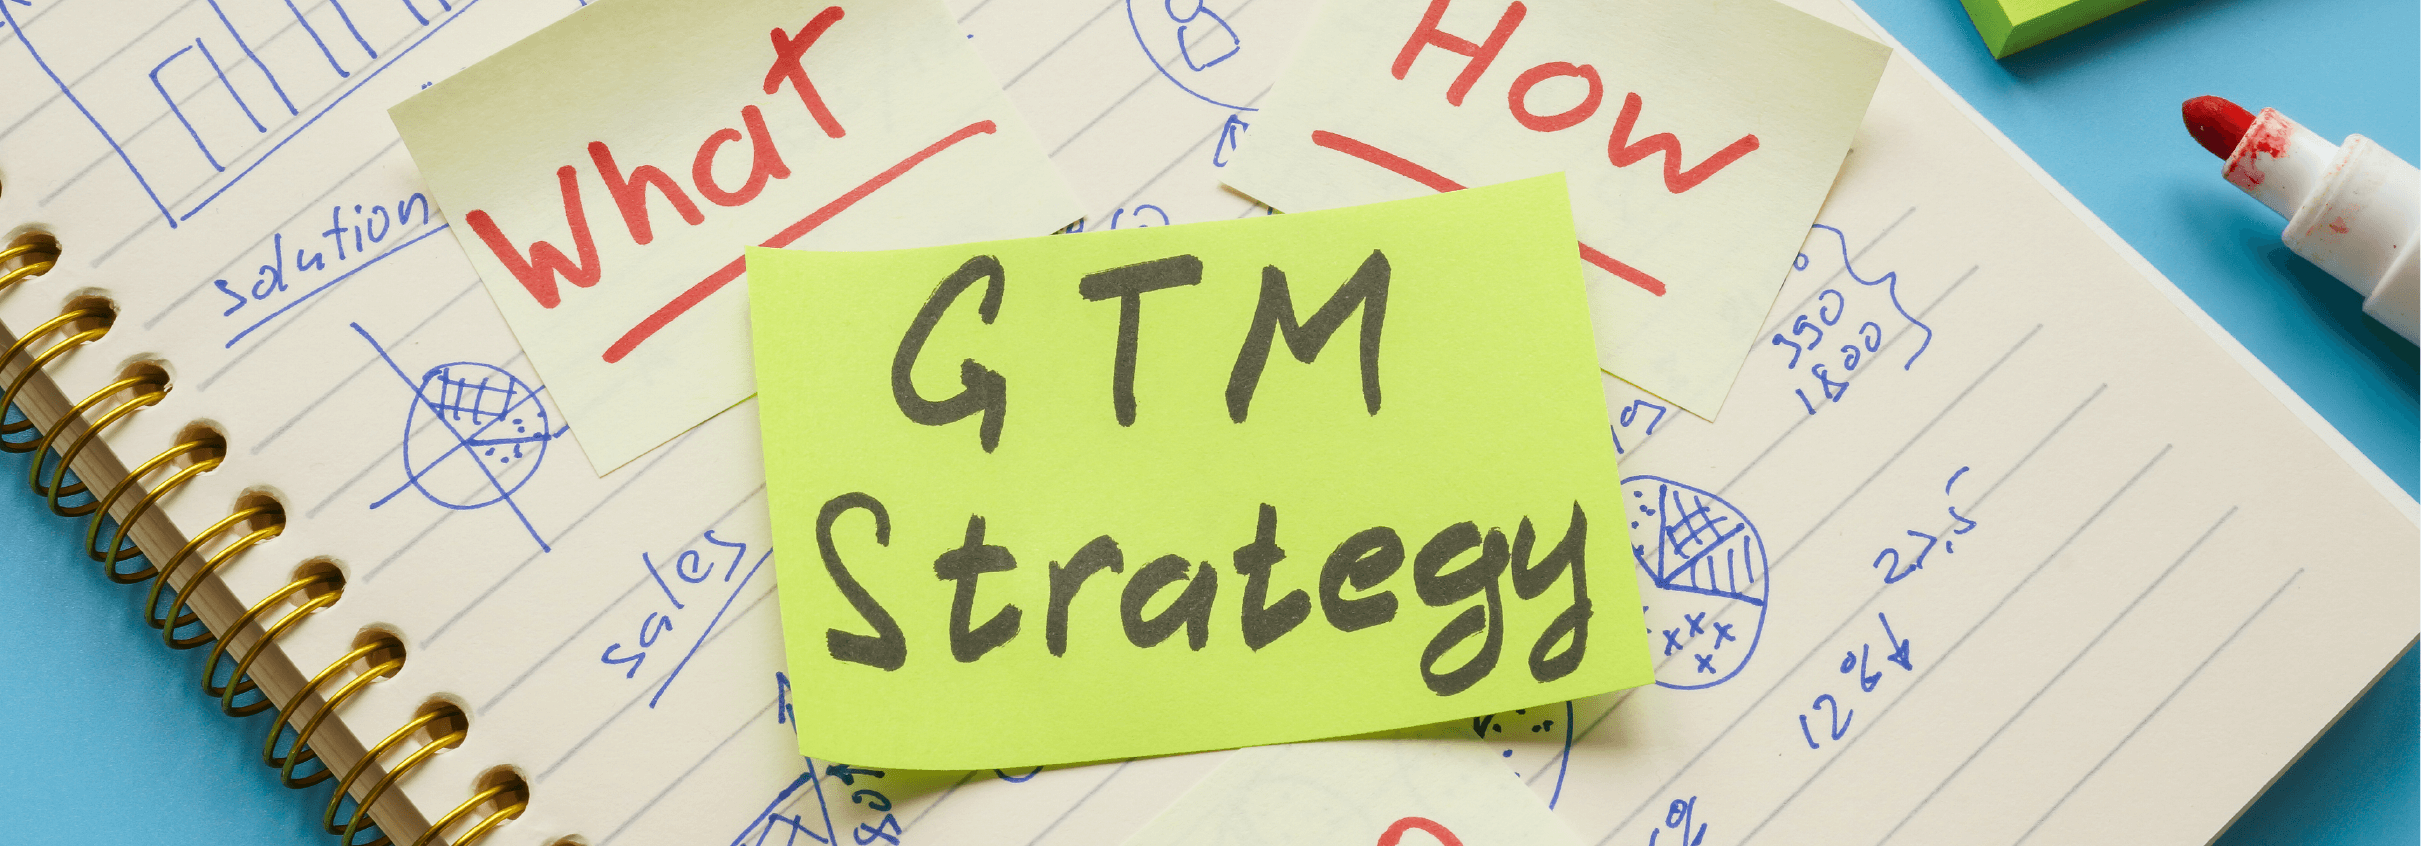 Types of GTM Strategies for Businesses